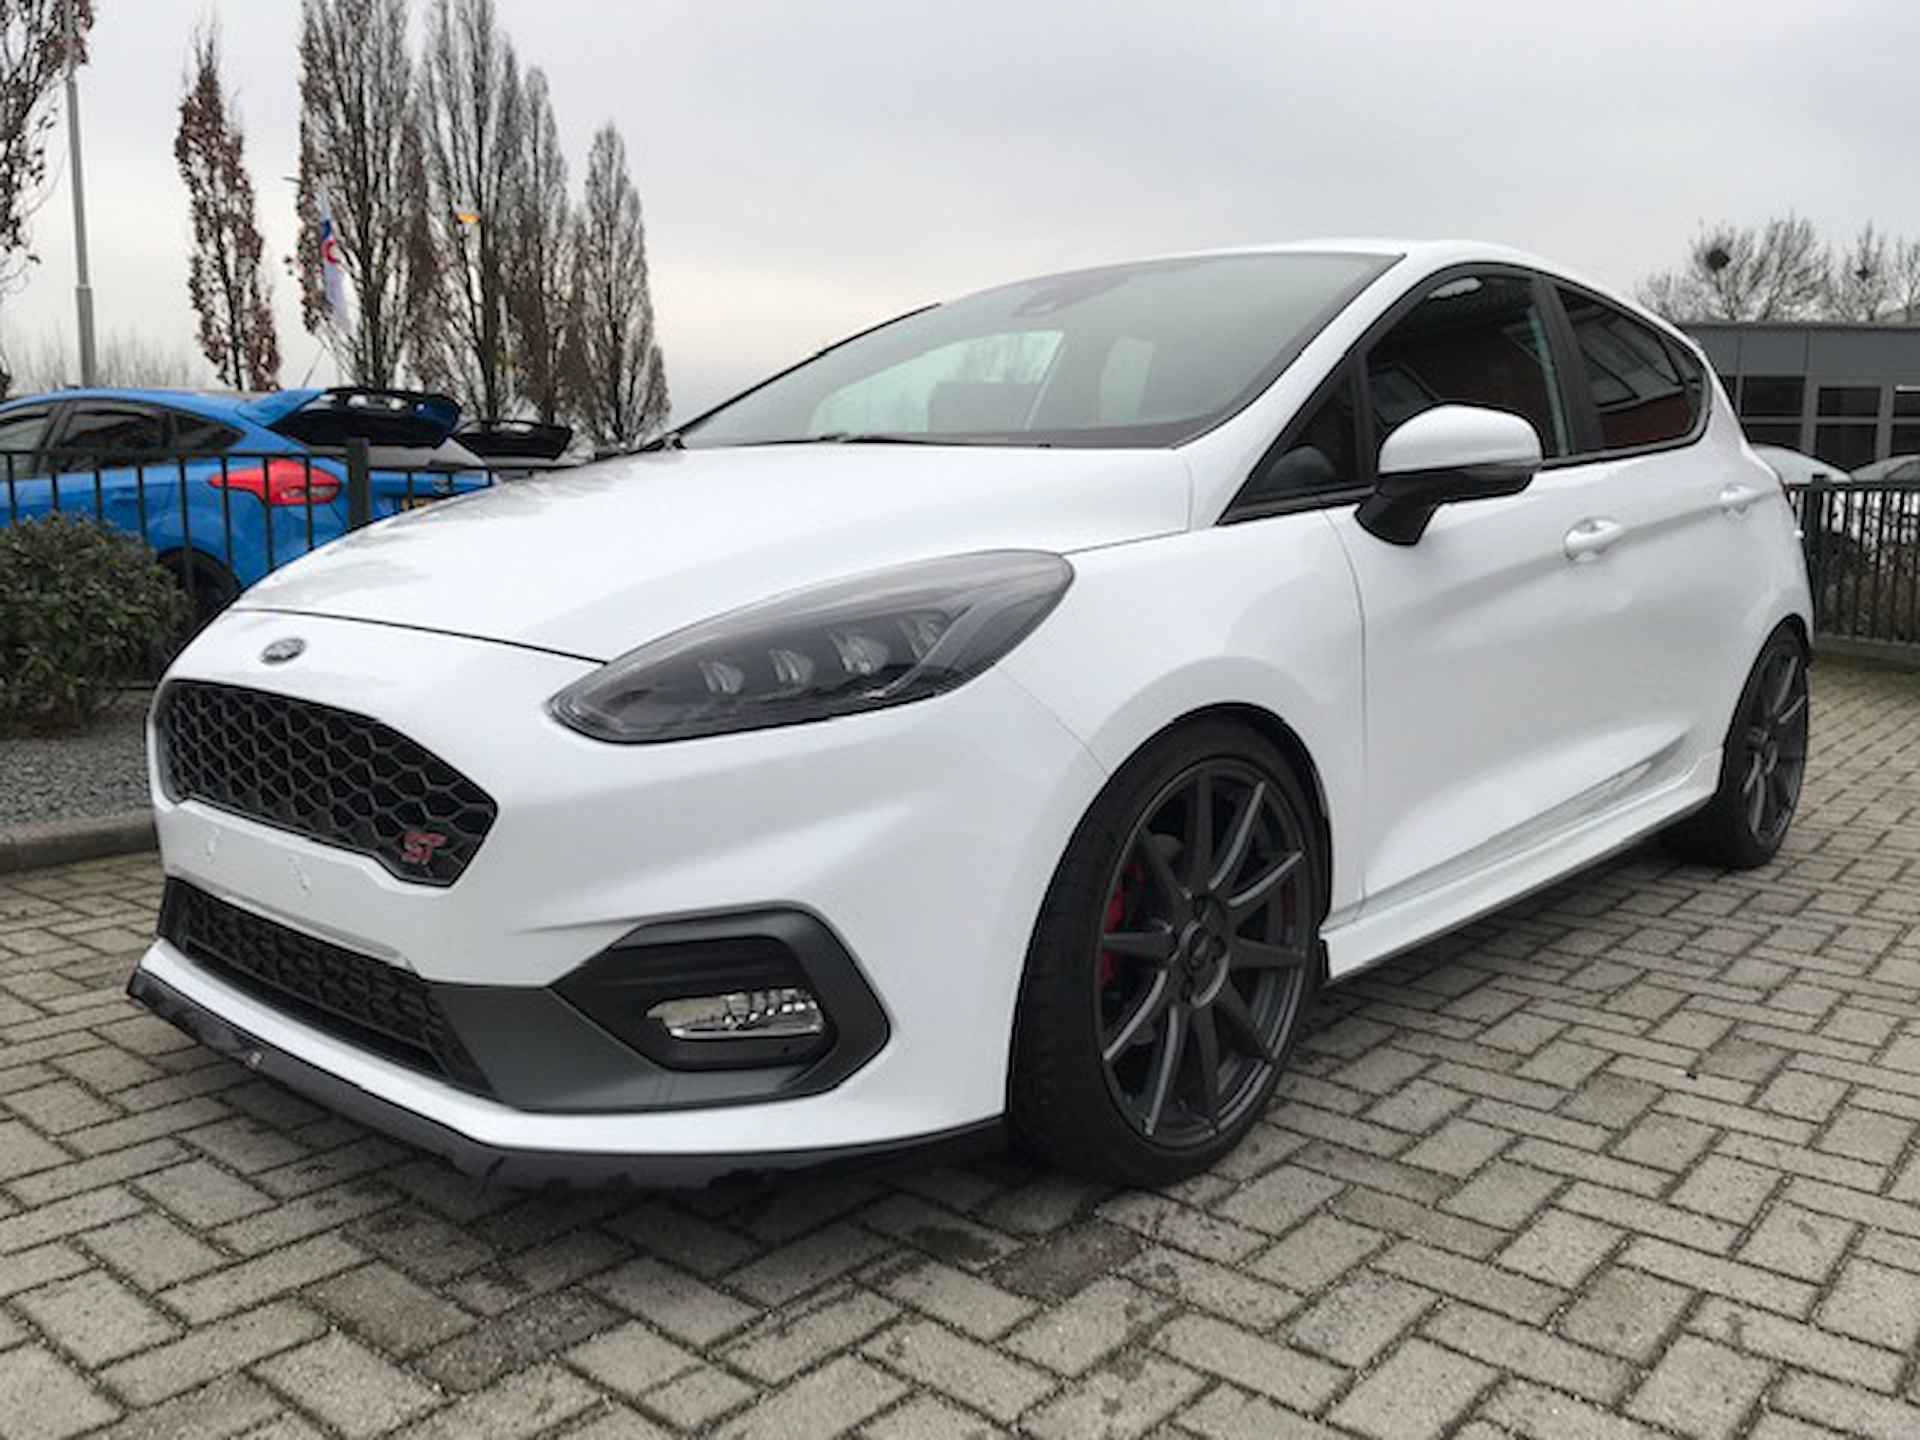 Ford Fiesta 1.5 EcoBoost ST-3 Mountune 235 PK Performance - 9/11